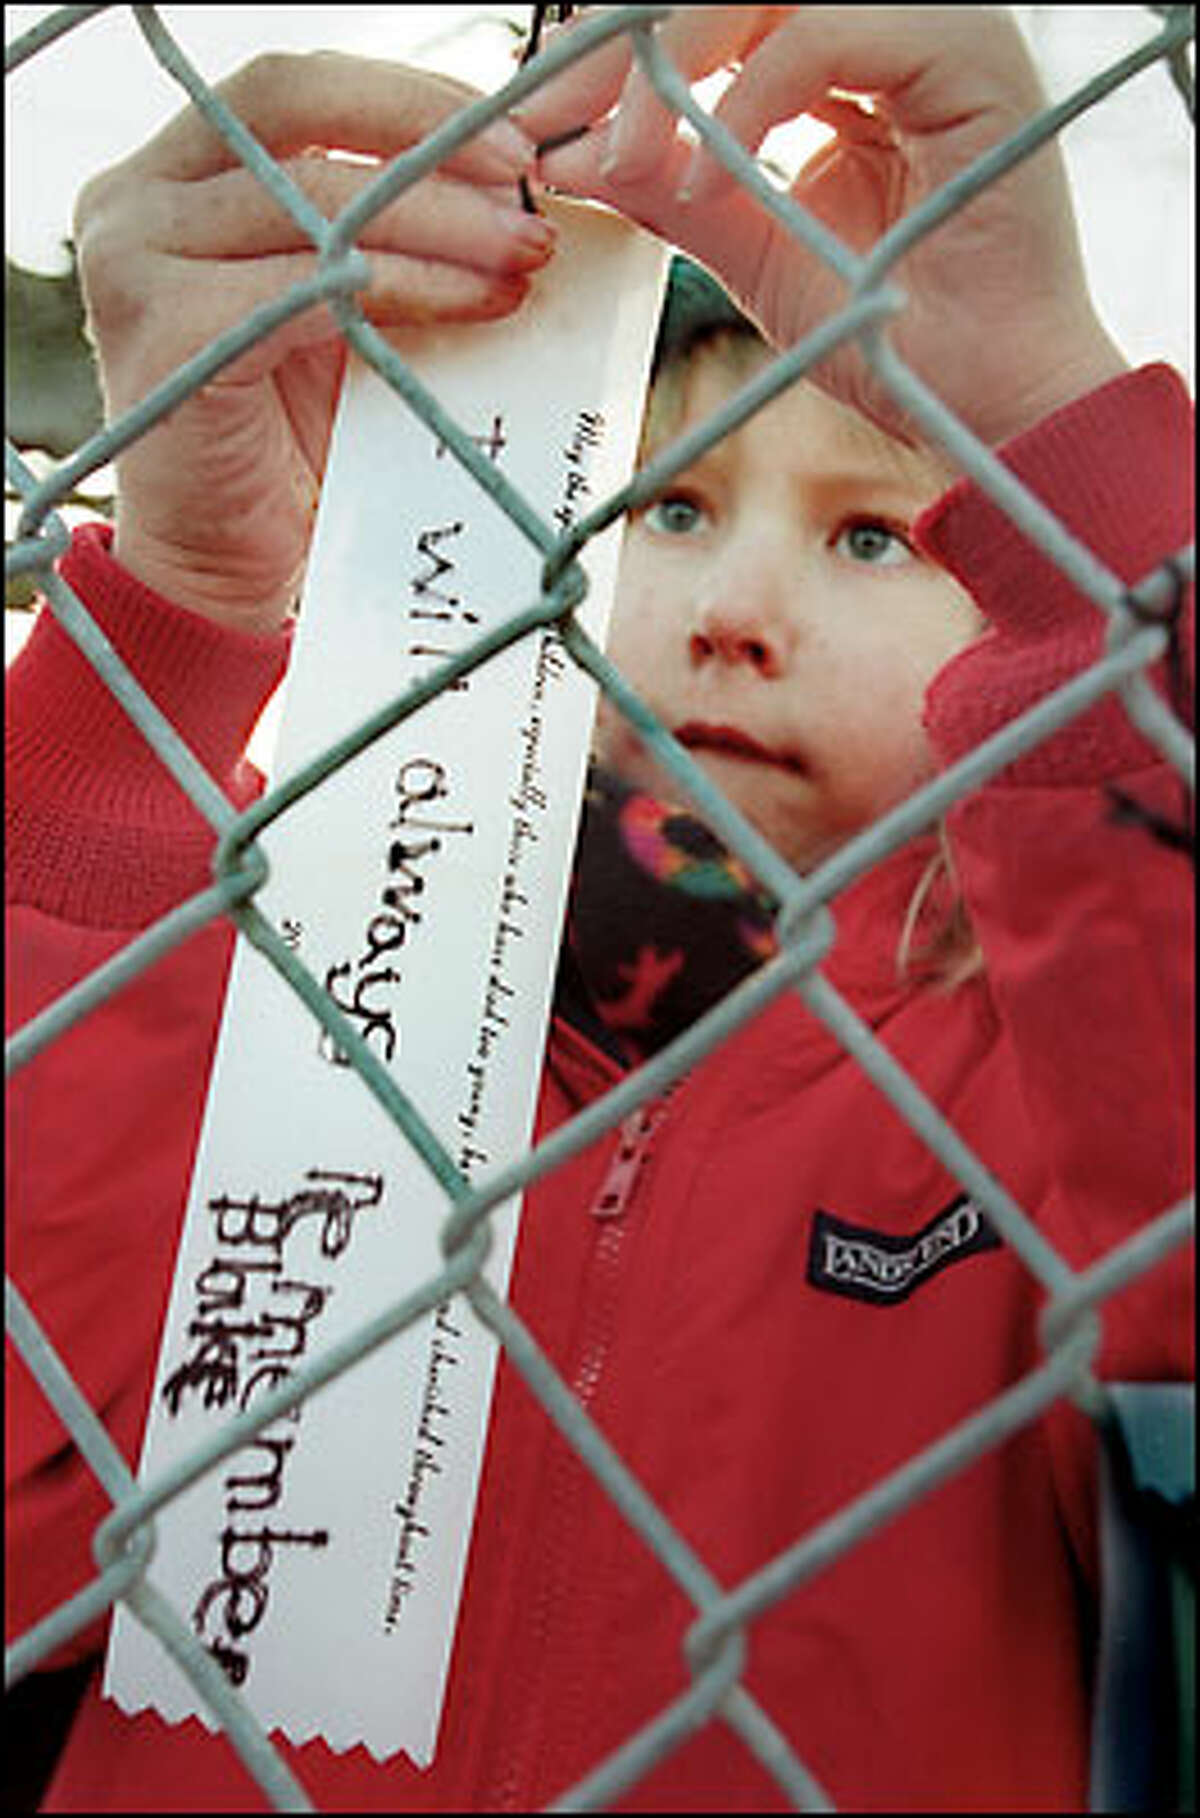 John Hay Elementary first-grader Corby Johnson ties a ribbon to a fence with a message to friend Blake Barnett-Clemetson, who died in the crash of Alaska Airlines Flight 261 in January 2000. The school broke ground on a memorial garden for crash victims yesterday.